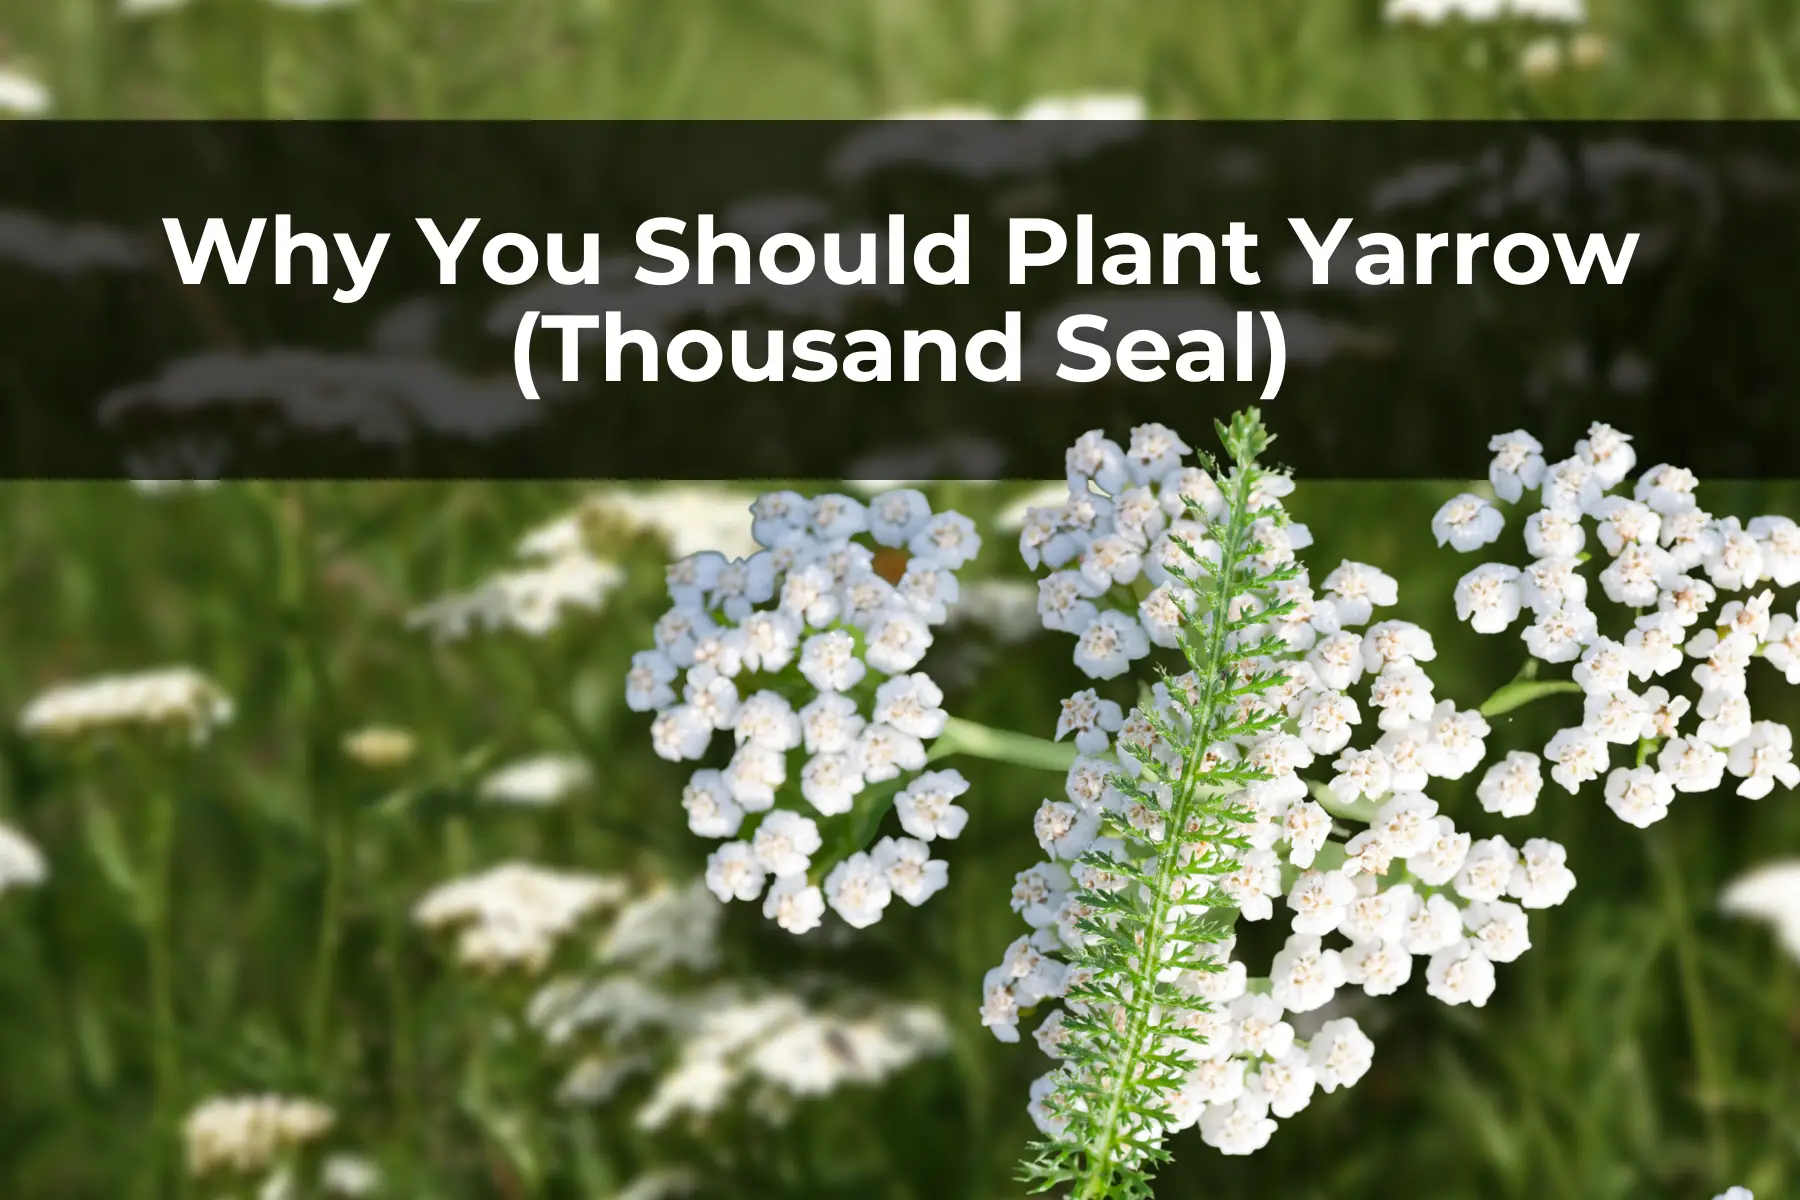 Why You Should Plant Yarrow (Thousand Seal)